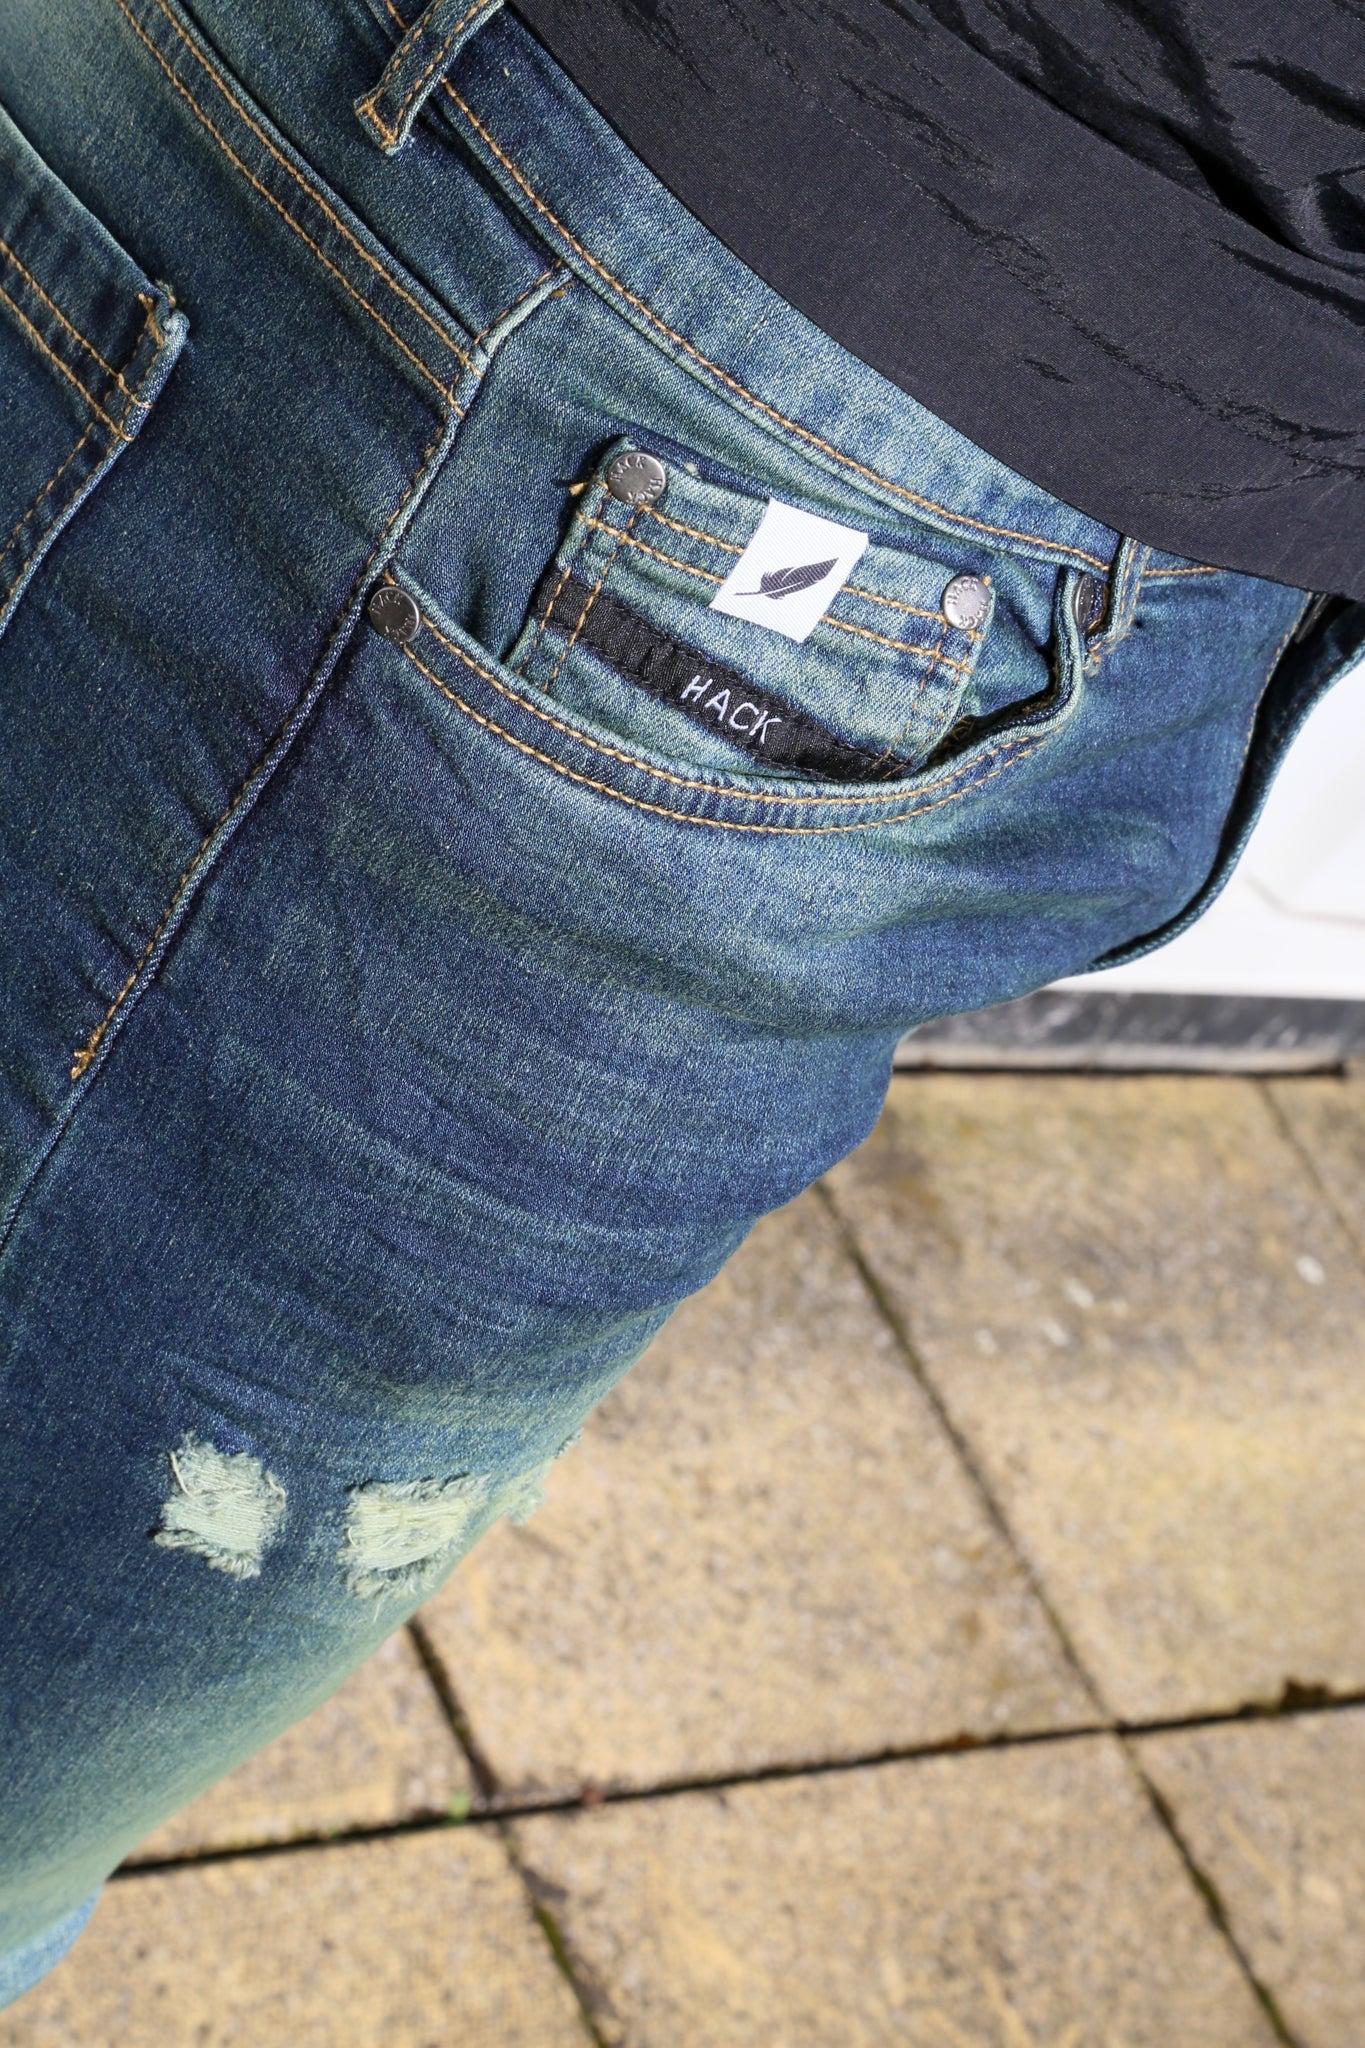 NOSTRA Ripped Jeans - Vintage Wash